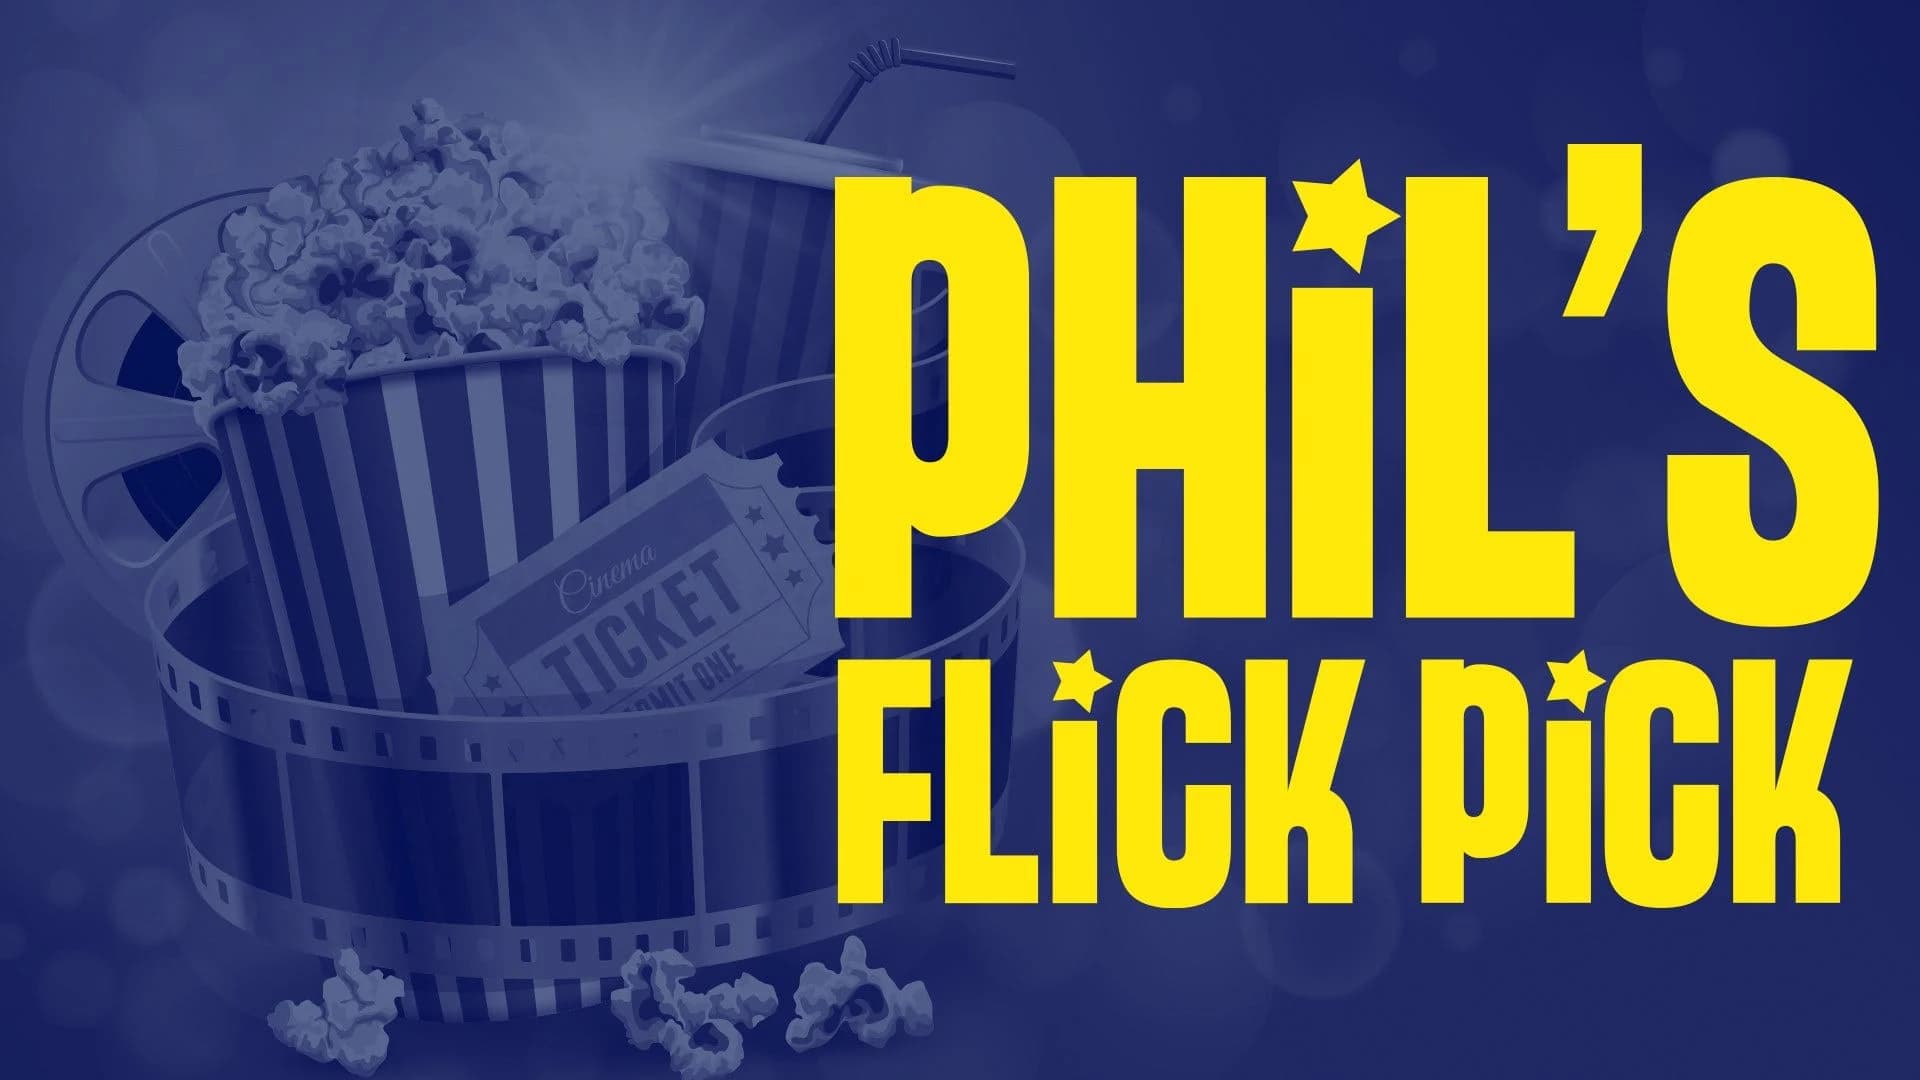 Phil's Flick Pick: Just stay home